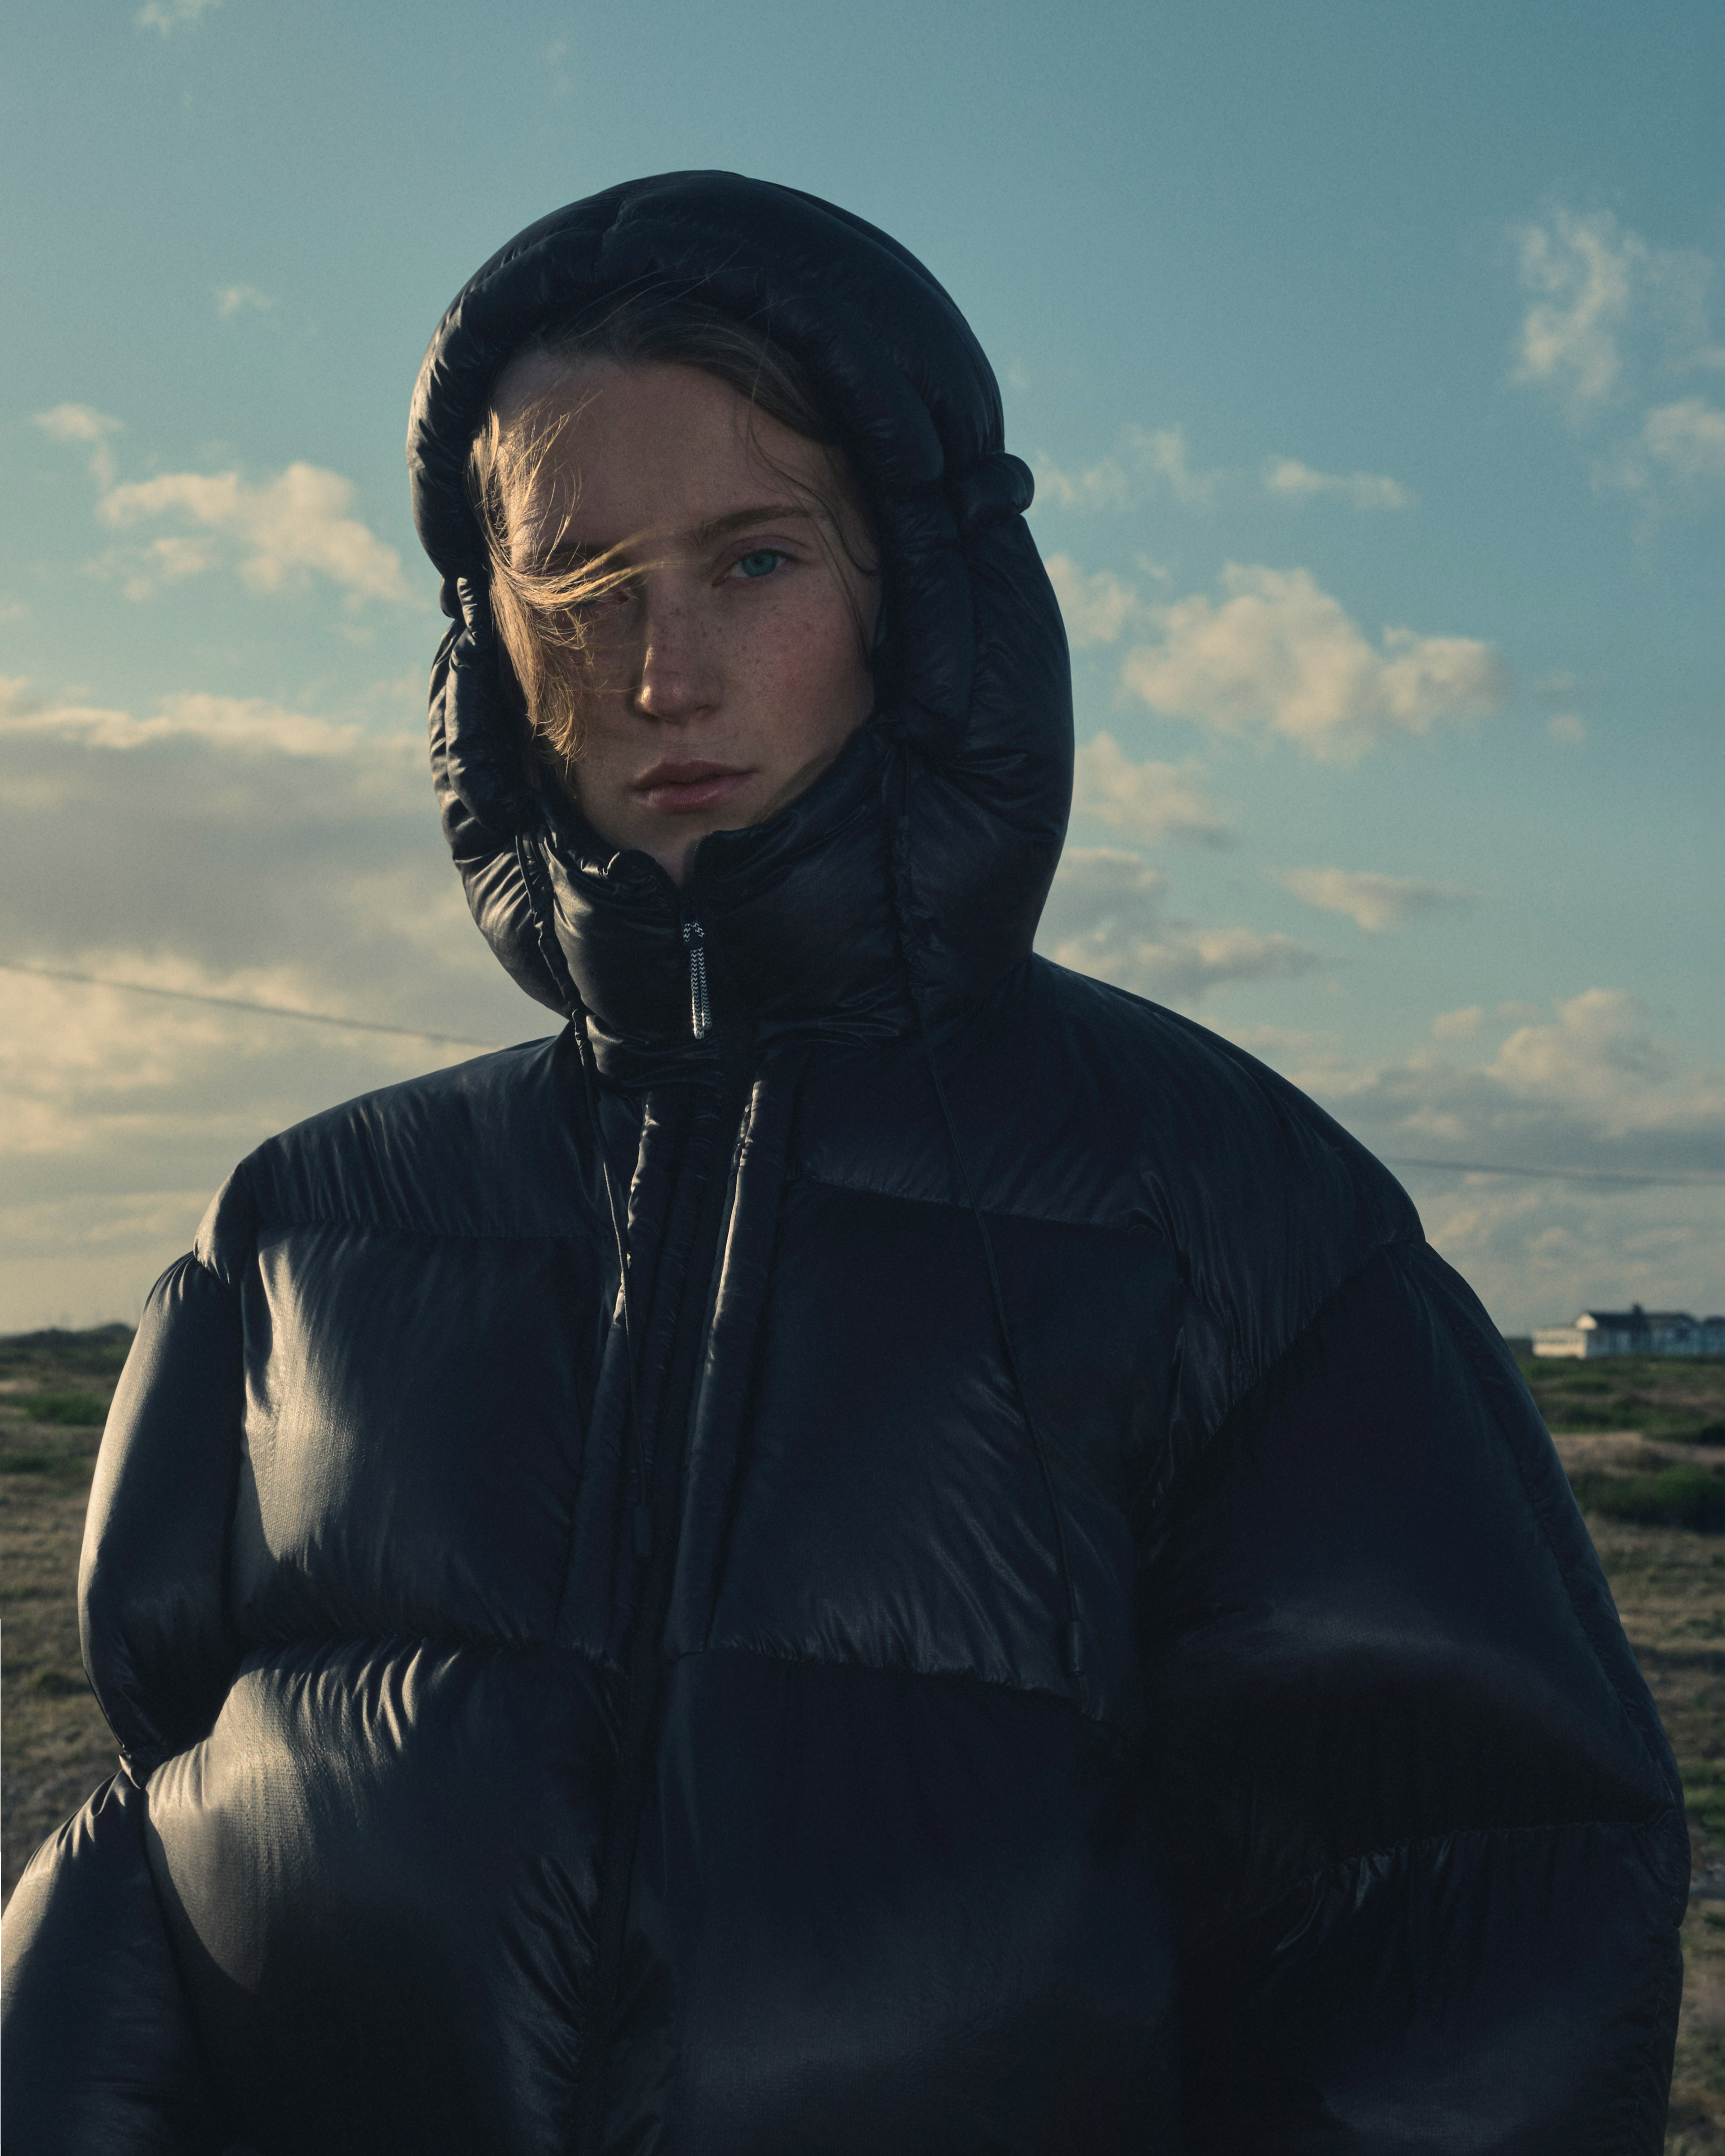 ROA Introduces Its Winter Collection To The Great Outdoors